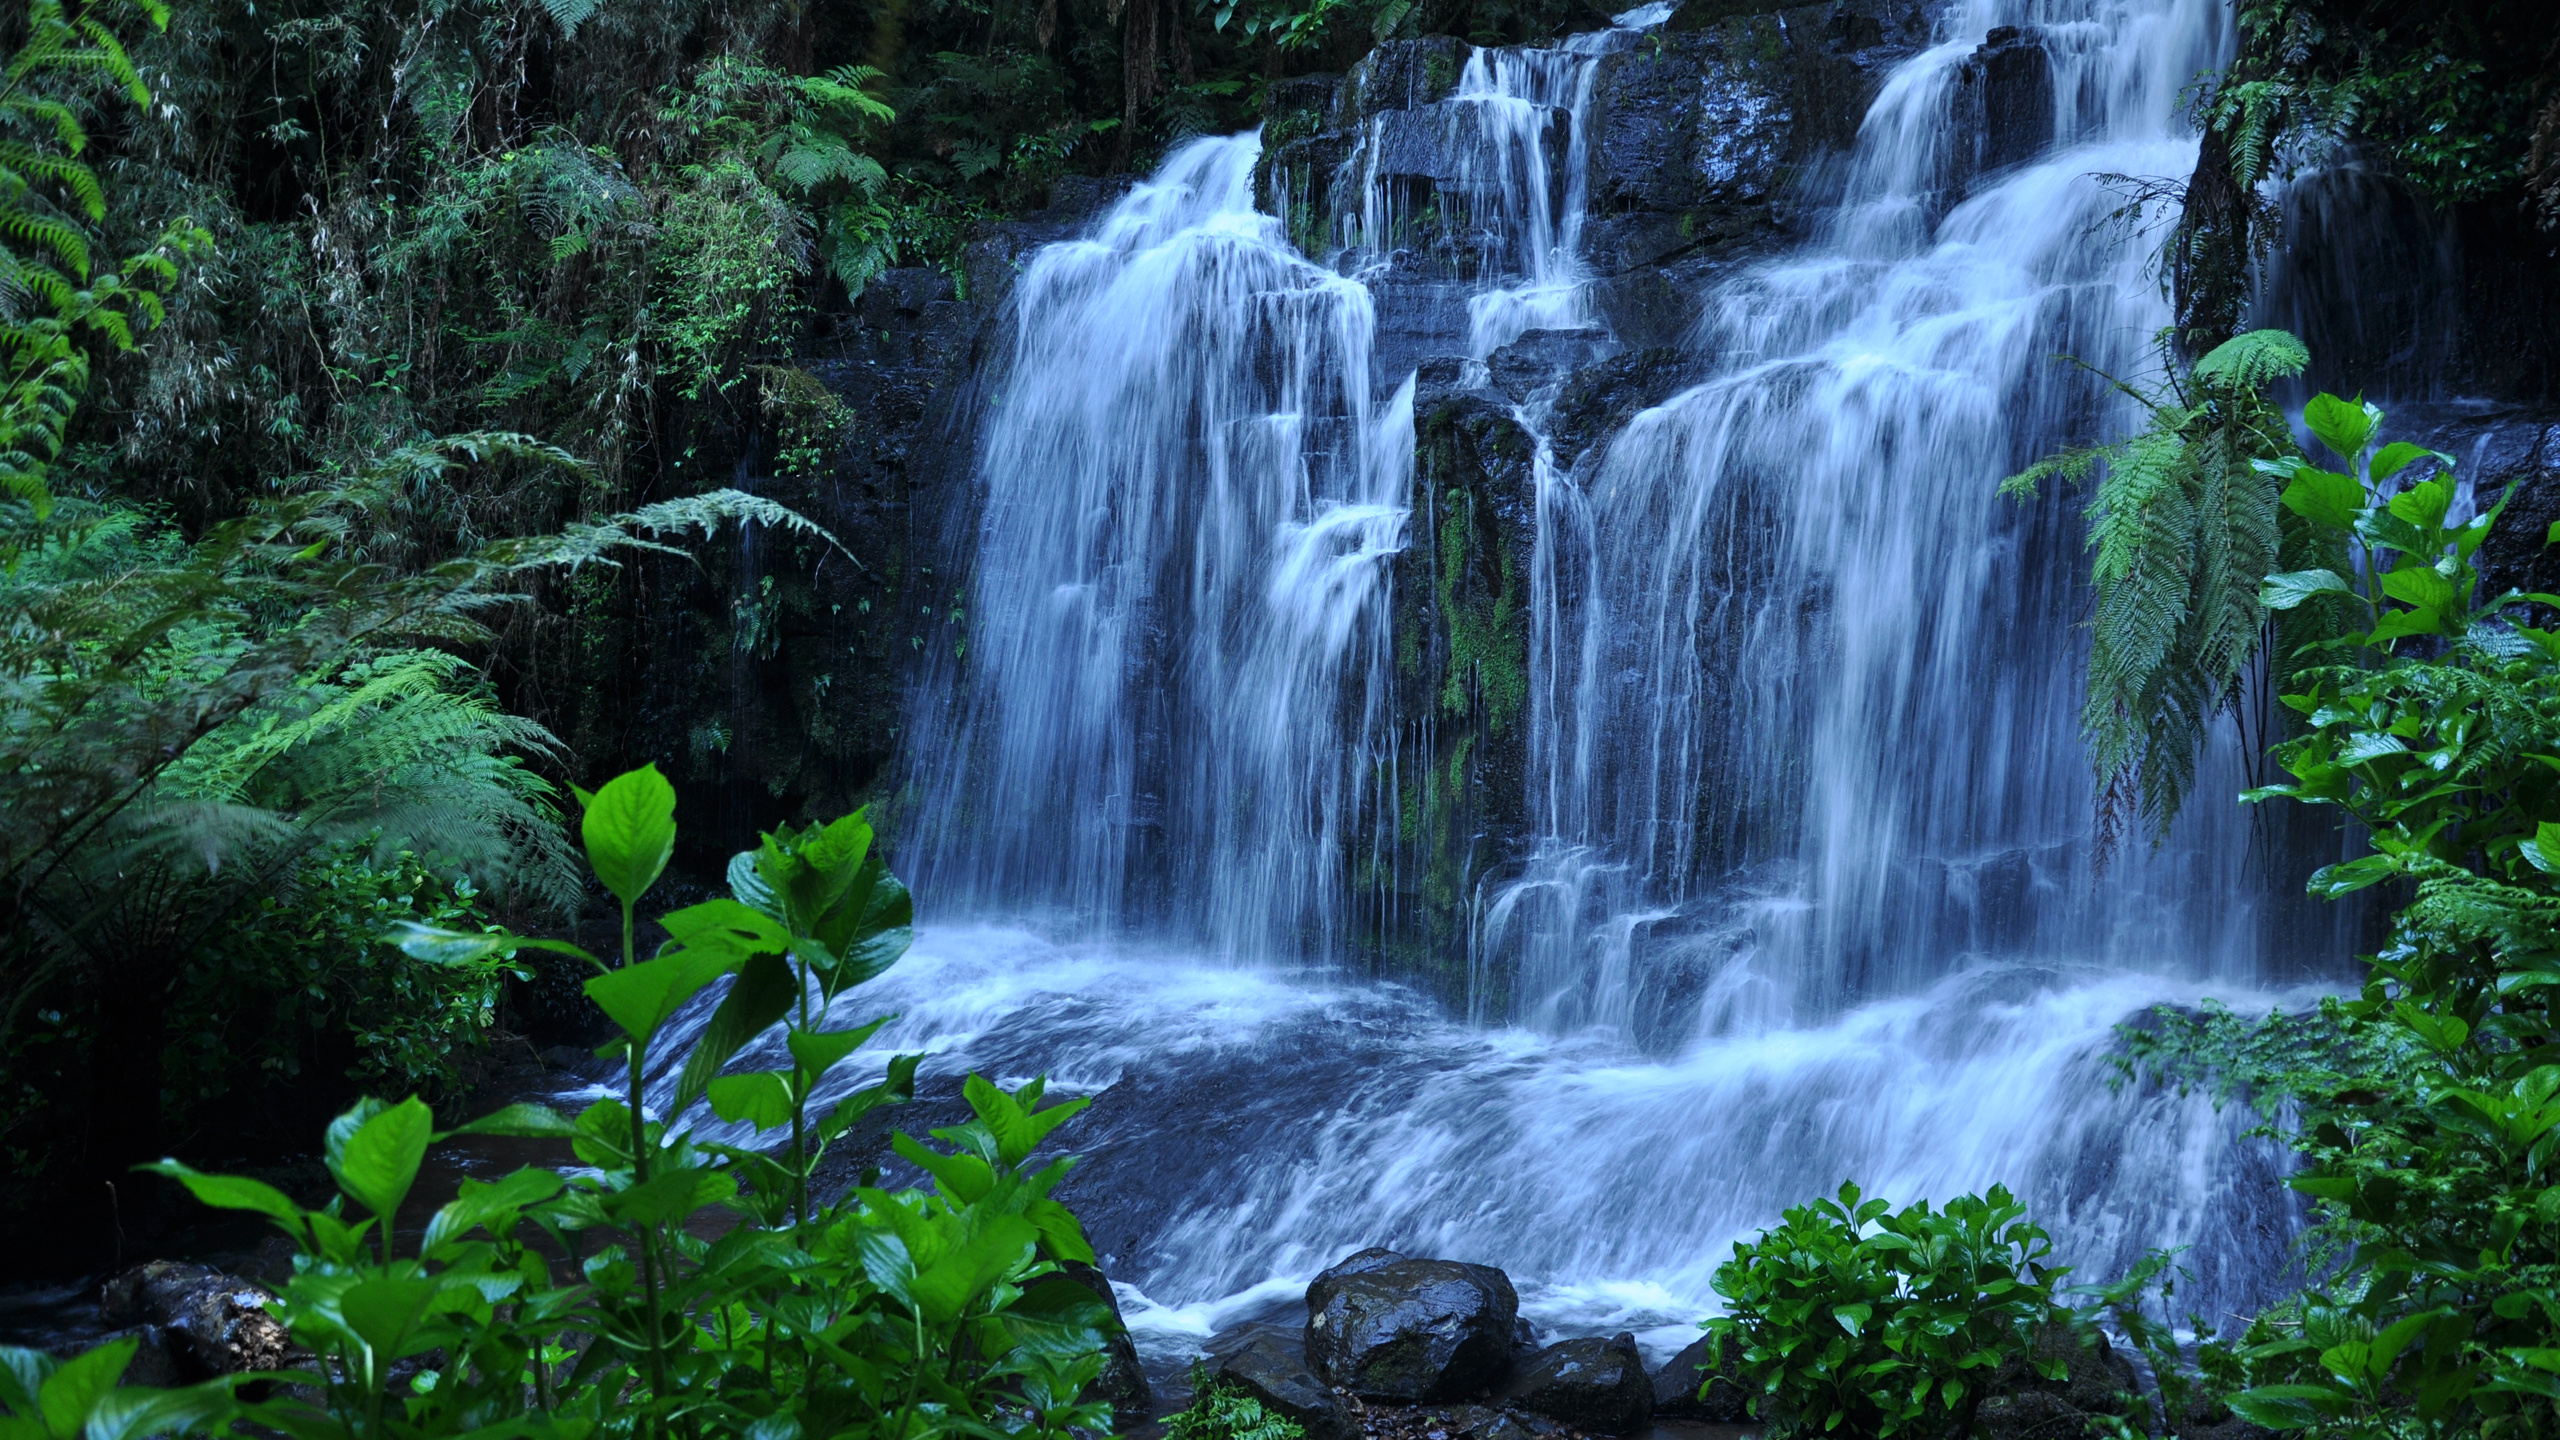 Water Falls in The Middle of Green Moss Covered Rocks. Wallpaper in 2560x1440 Resolution